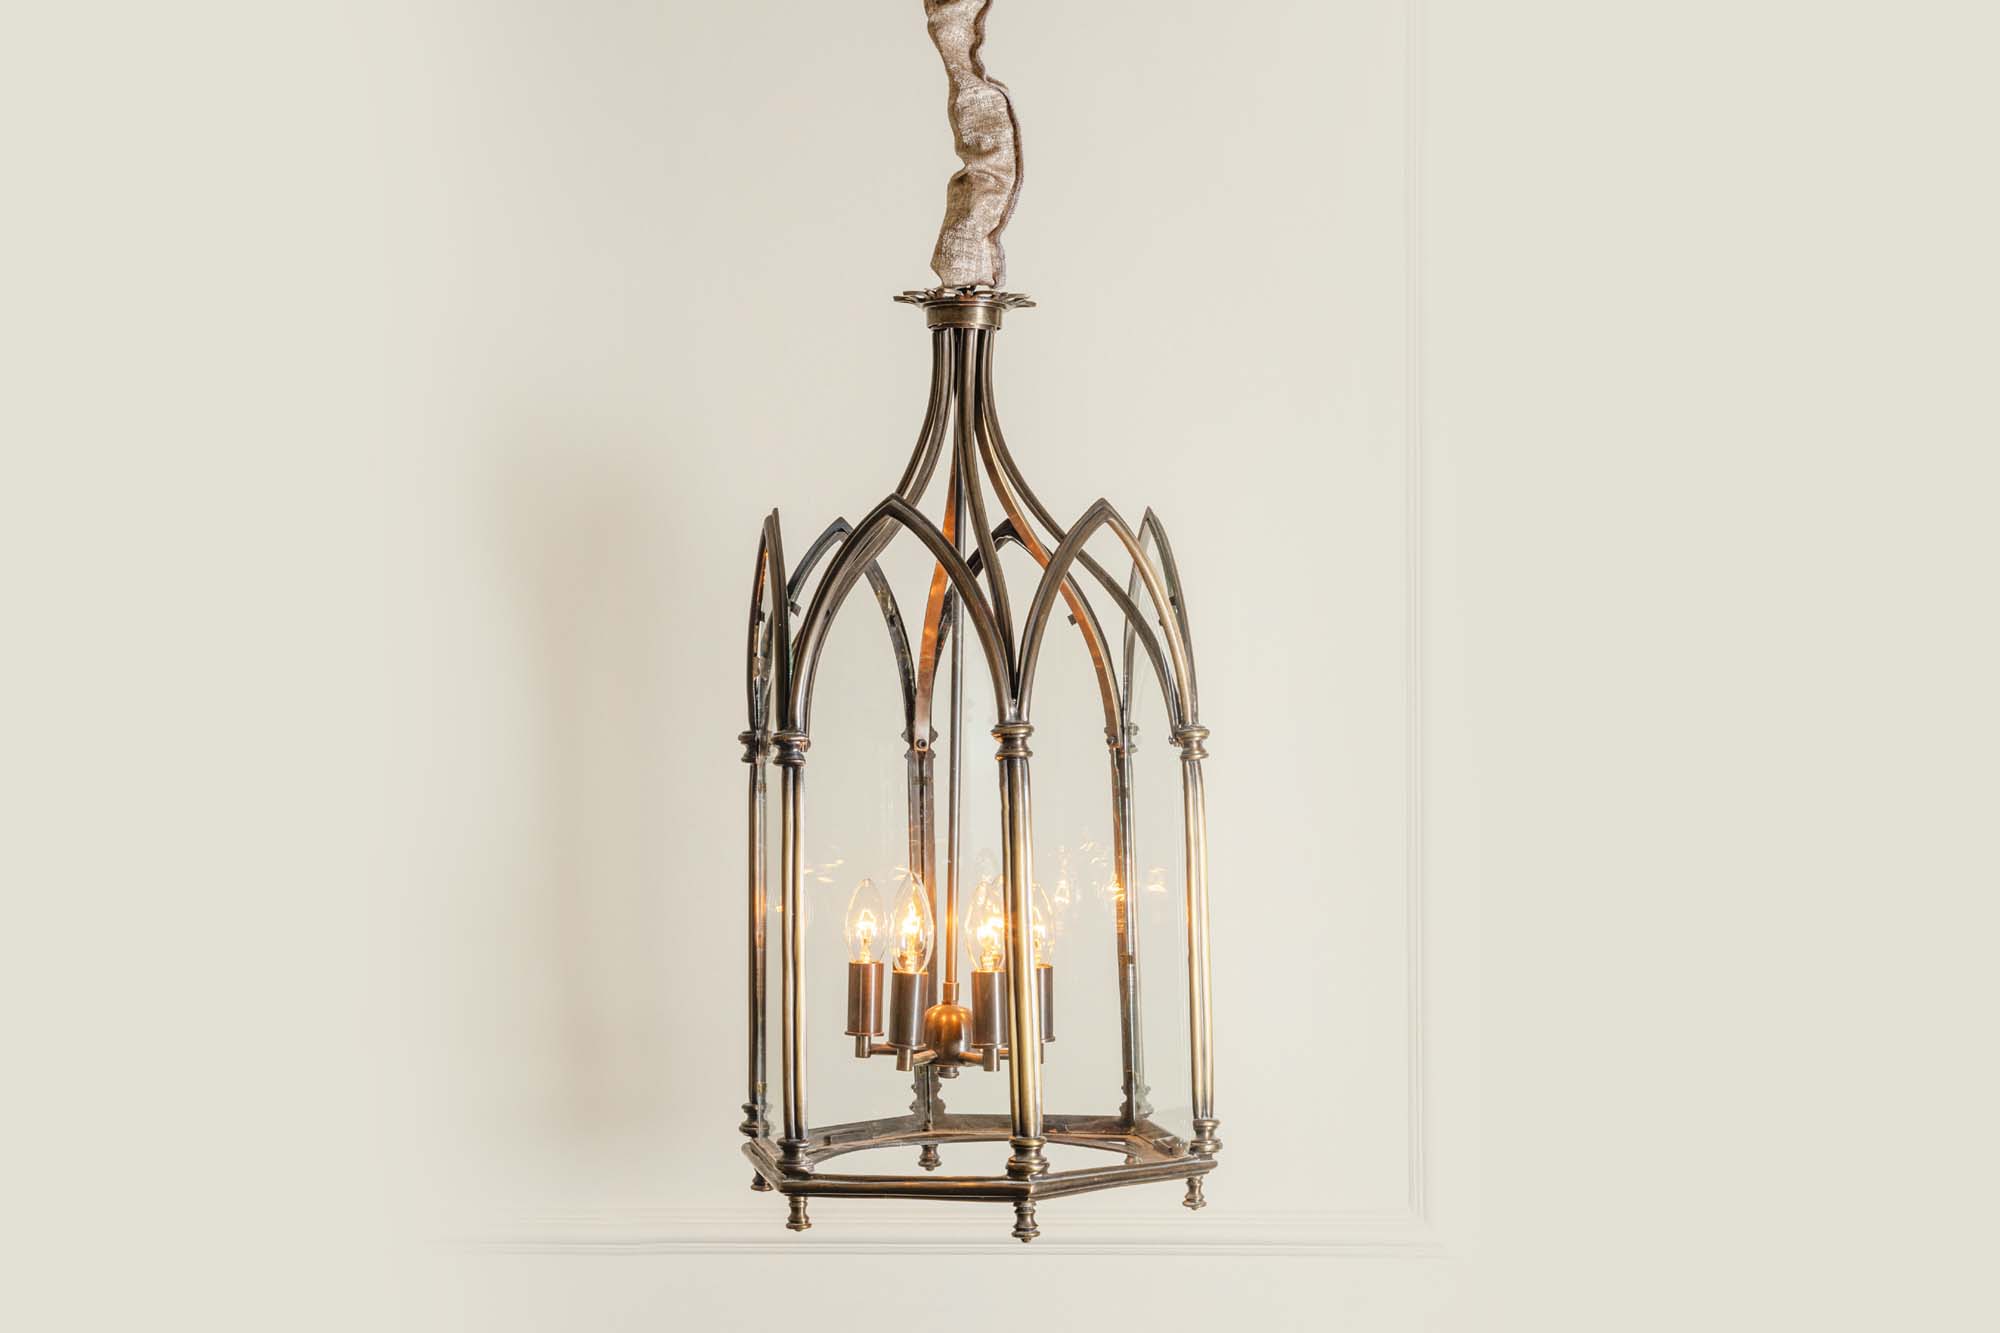 The timeless elegance of the lantern collection by Luxaddi